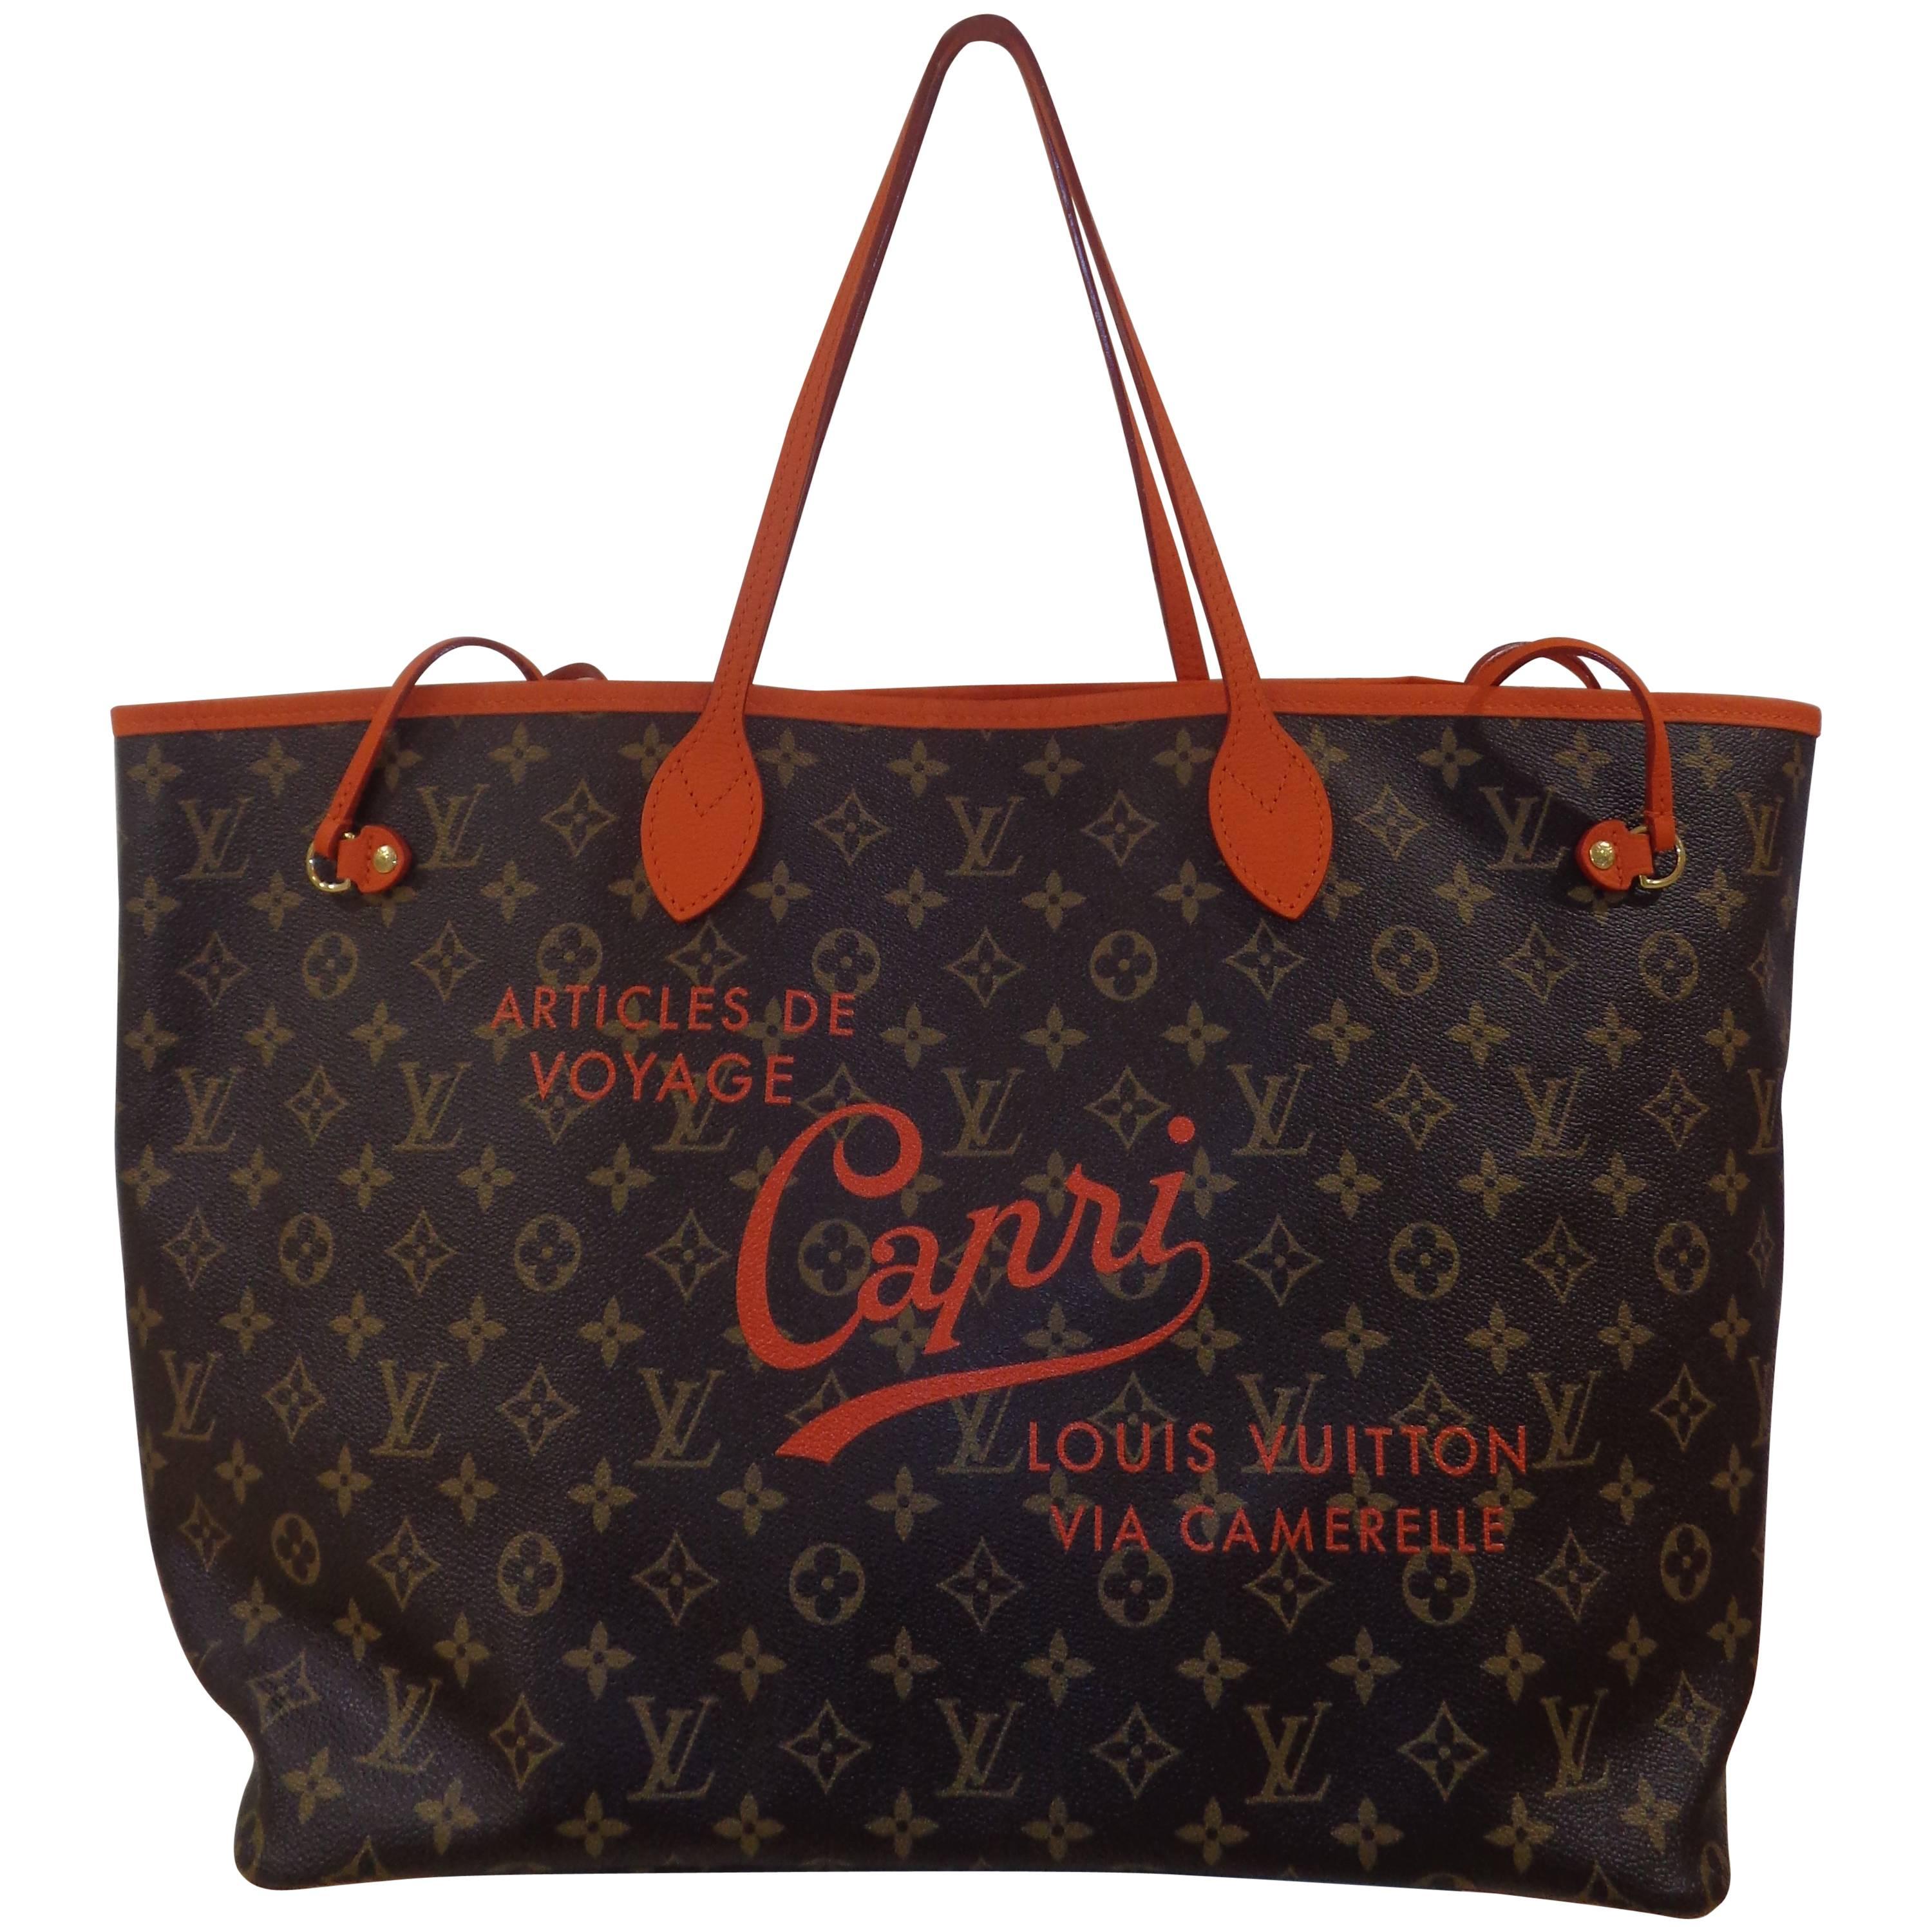 Neverfull Ikat - For Sale on 1stDibs  louis vuitton ikat, is the neverfull  being discontinued, louis vuitton ikat neverfull